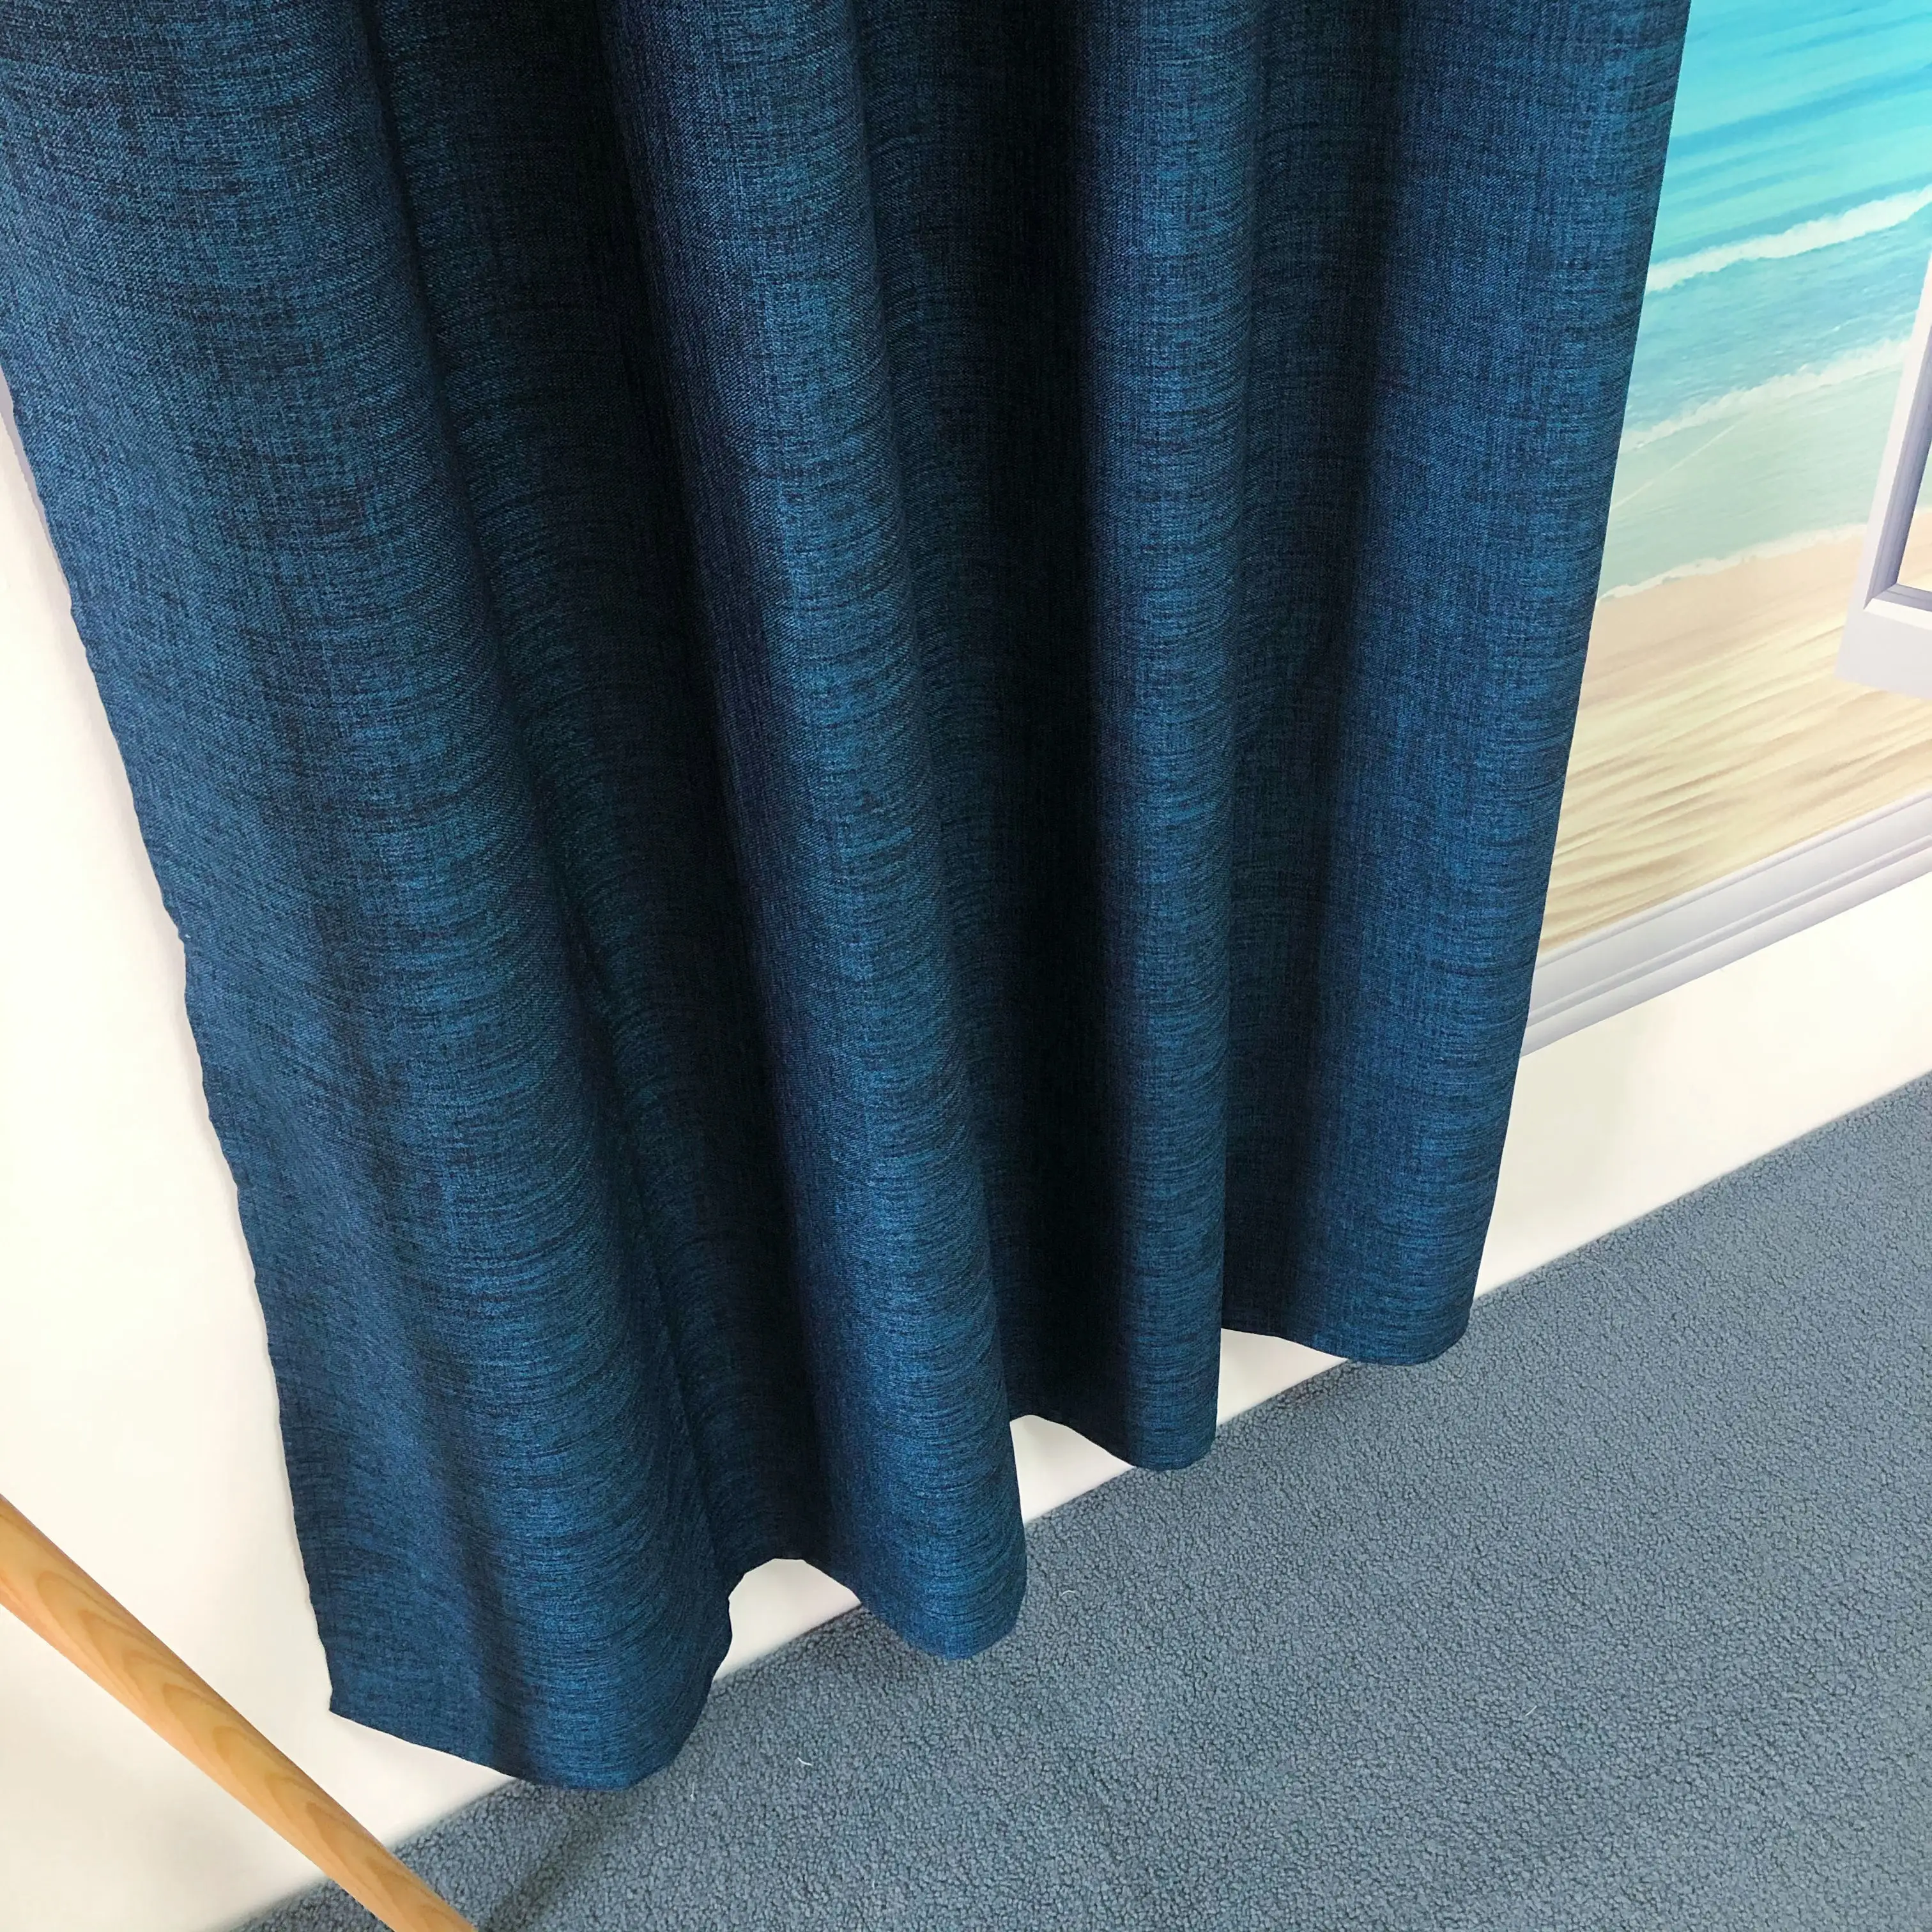 Blue KEQIAO CHINA BK-4 DARK BLUE NICE SIMPLE POLYESTER DESIGN POLYESTER PLAIN VOILE DOLLY BLACKOUT SHEER PANEL CURTAIN GOOD PRICE